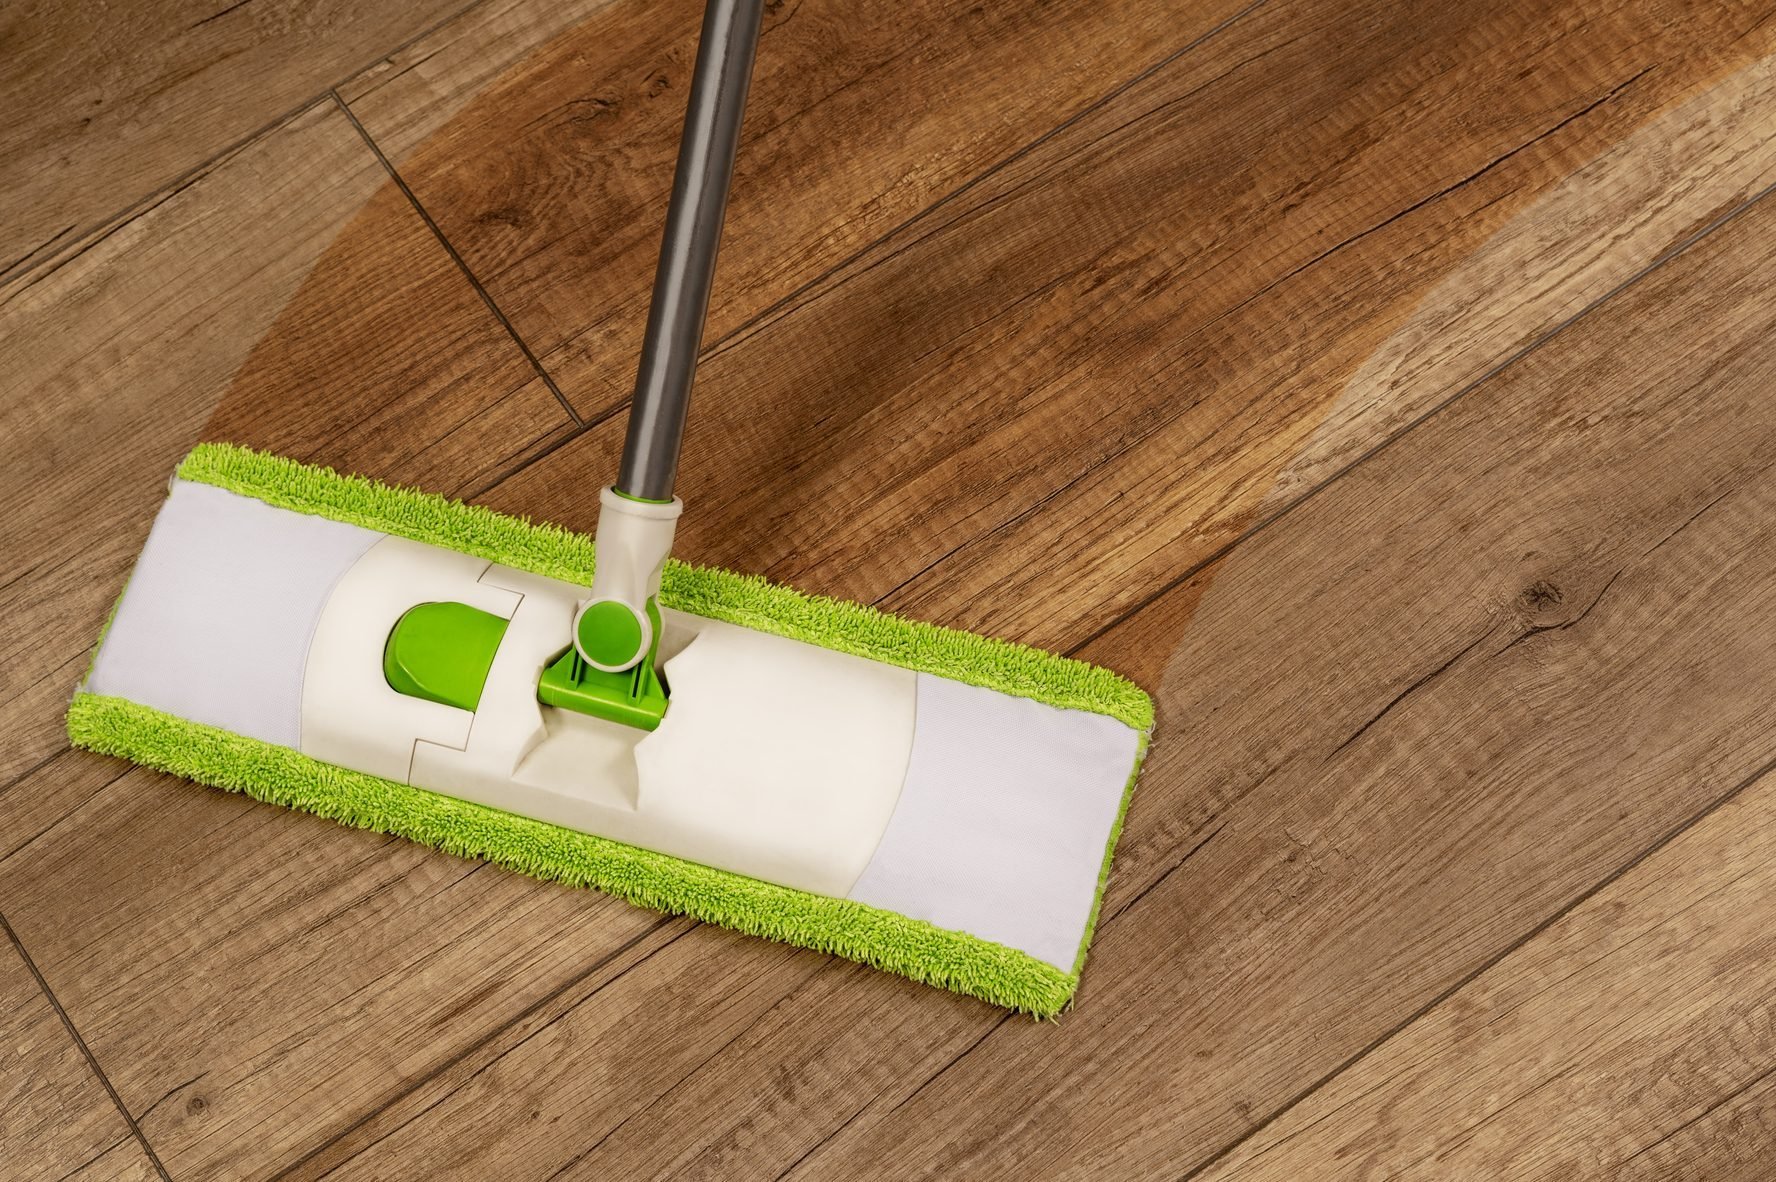 Real Clean Floors Cleaner: A Powerful, Family-Safe, Natural, Cleaning  Solution. - Real Wood Floors